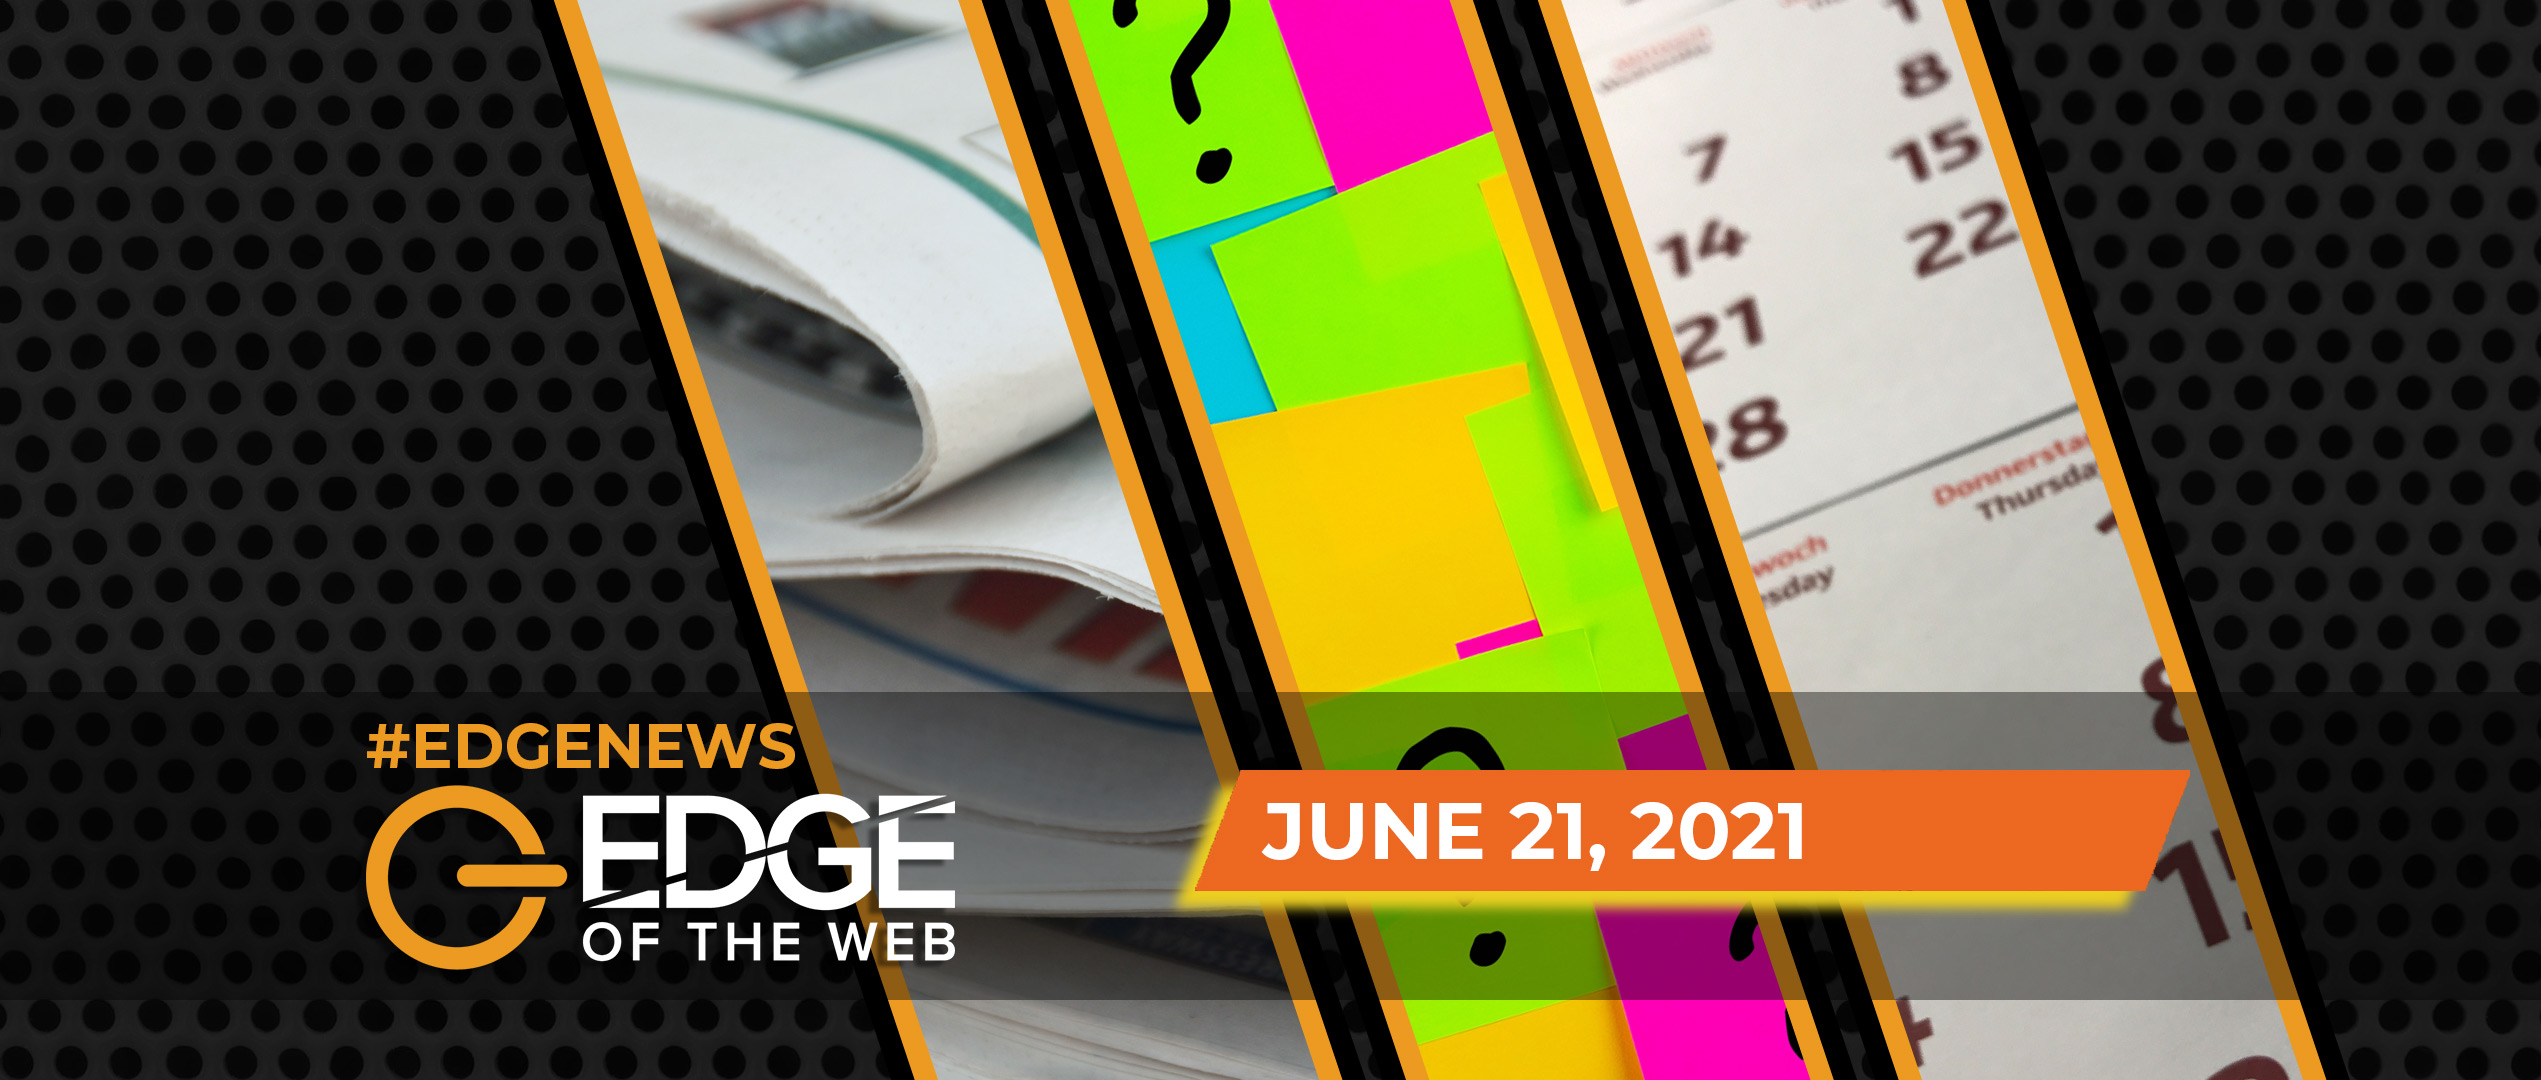 430 | News from the EDGE | Week of 6.21.2021